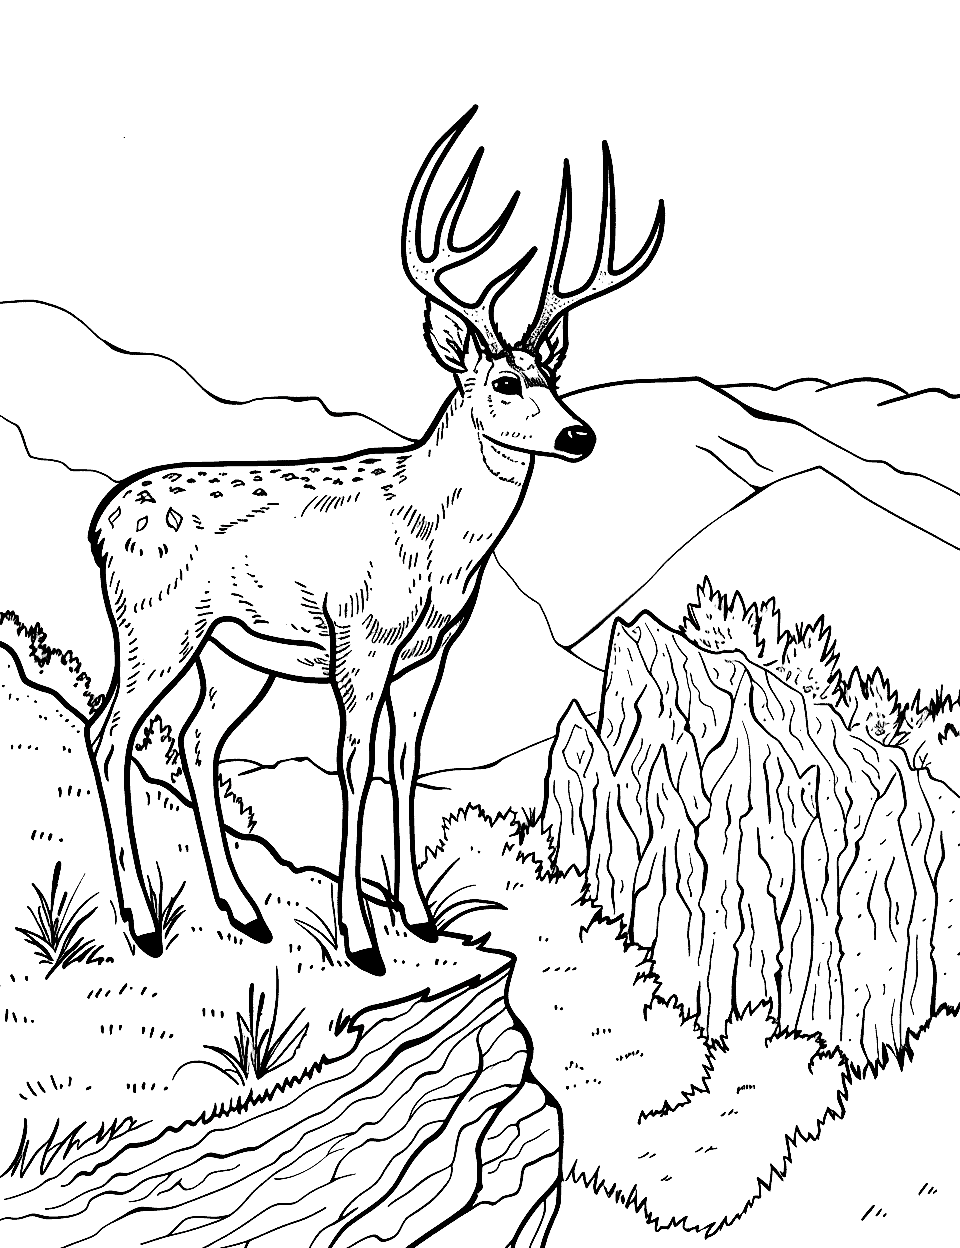 Buck Overlooking a Valley Coloring Page - A buck on a high vantage point, looking down at a lush valley below.